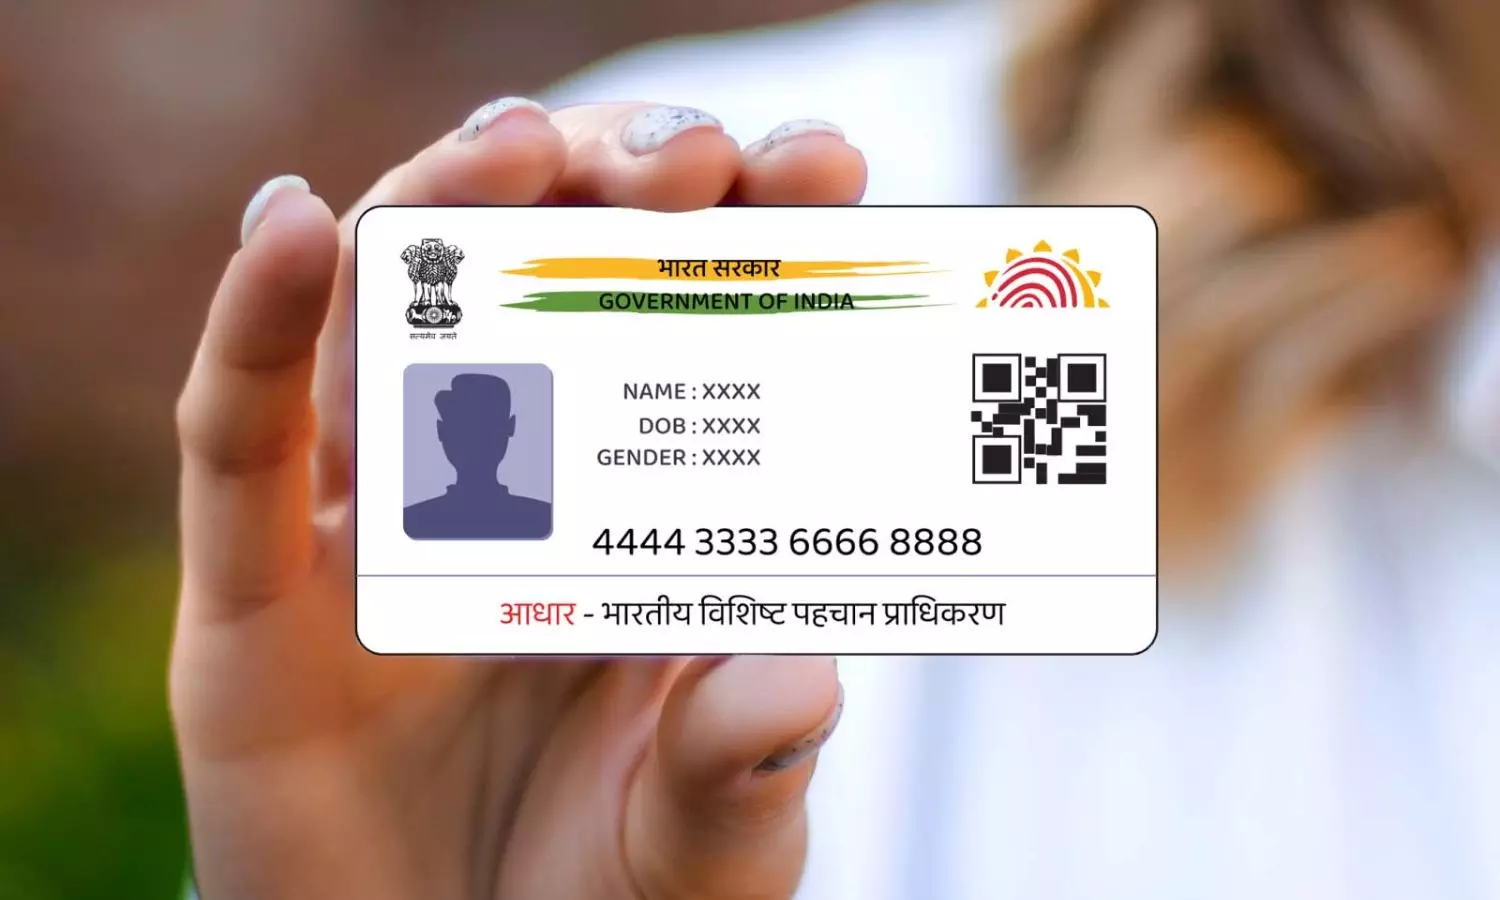 Aadhaar card is also an ATM card you can withdraw Rs.50 thousand from your home